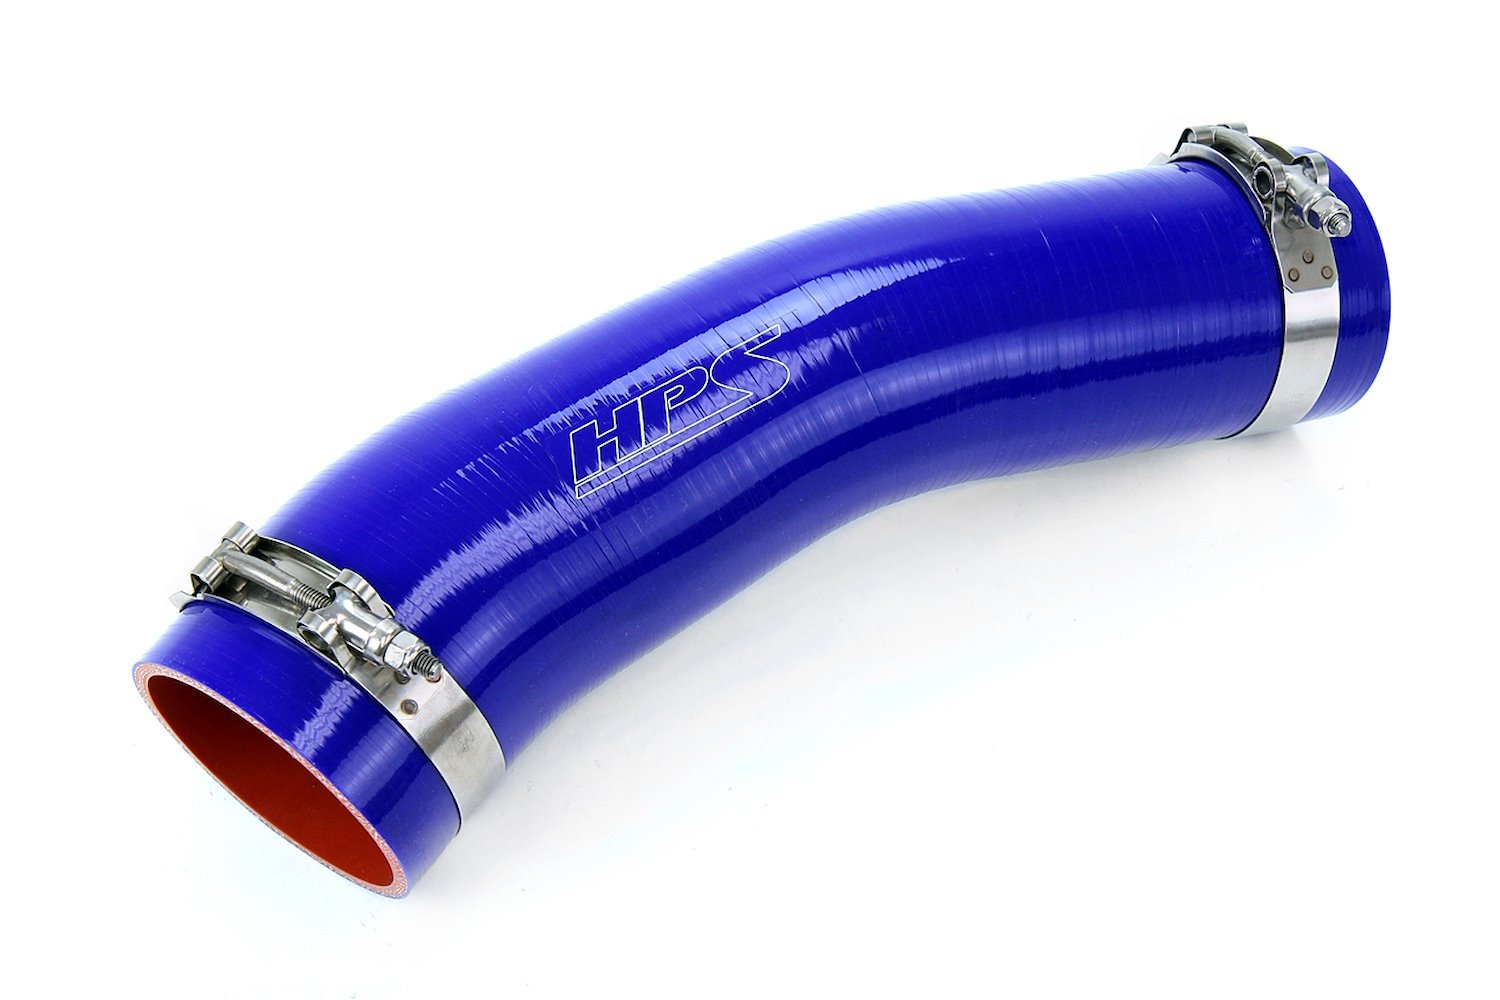 57-1289-BLUE Silicone Air Intake, Replace Stock Restrictive Air Intake, Improve Throttle Response, No Heat Soak